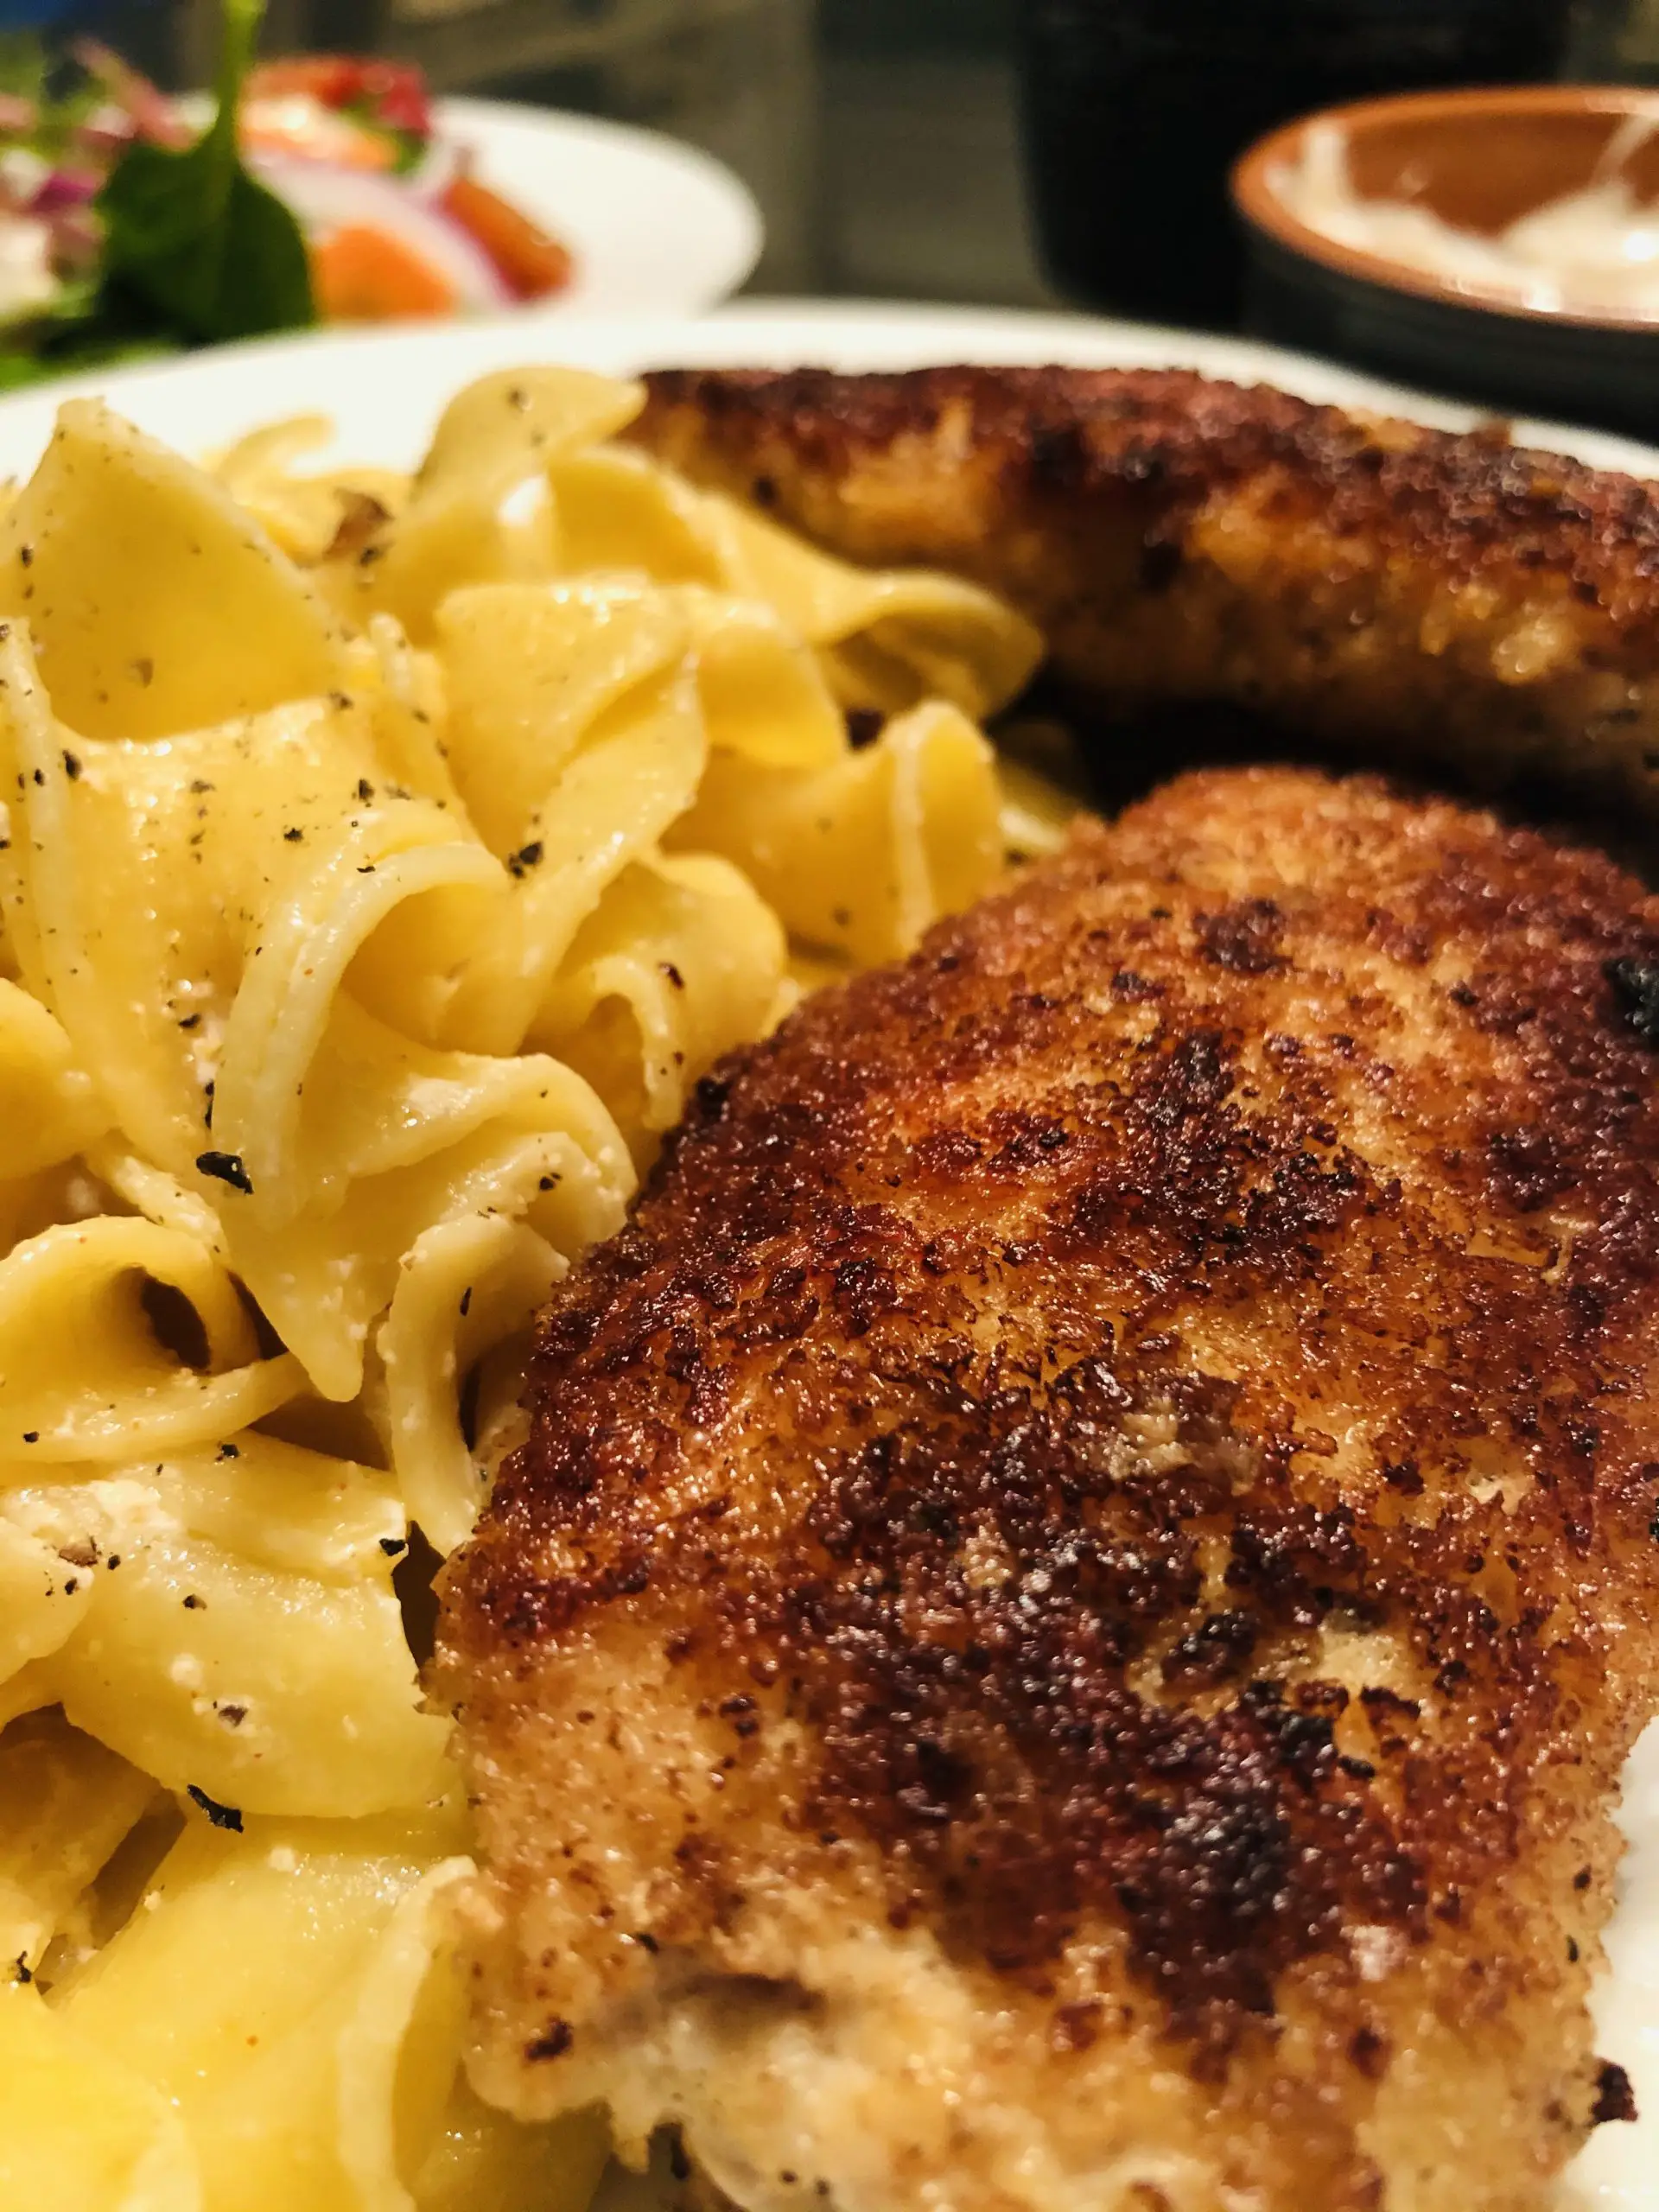 Russian Ground Chicken Cutlet and egg noodles